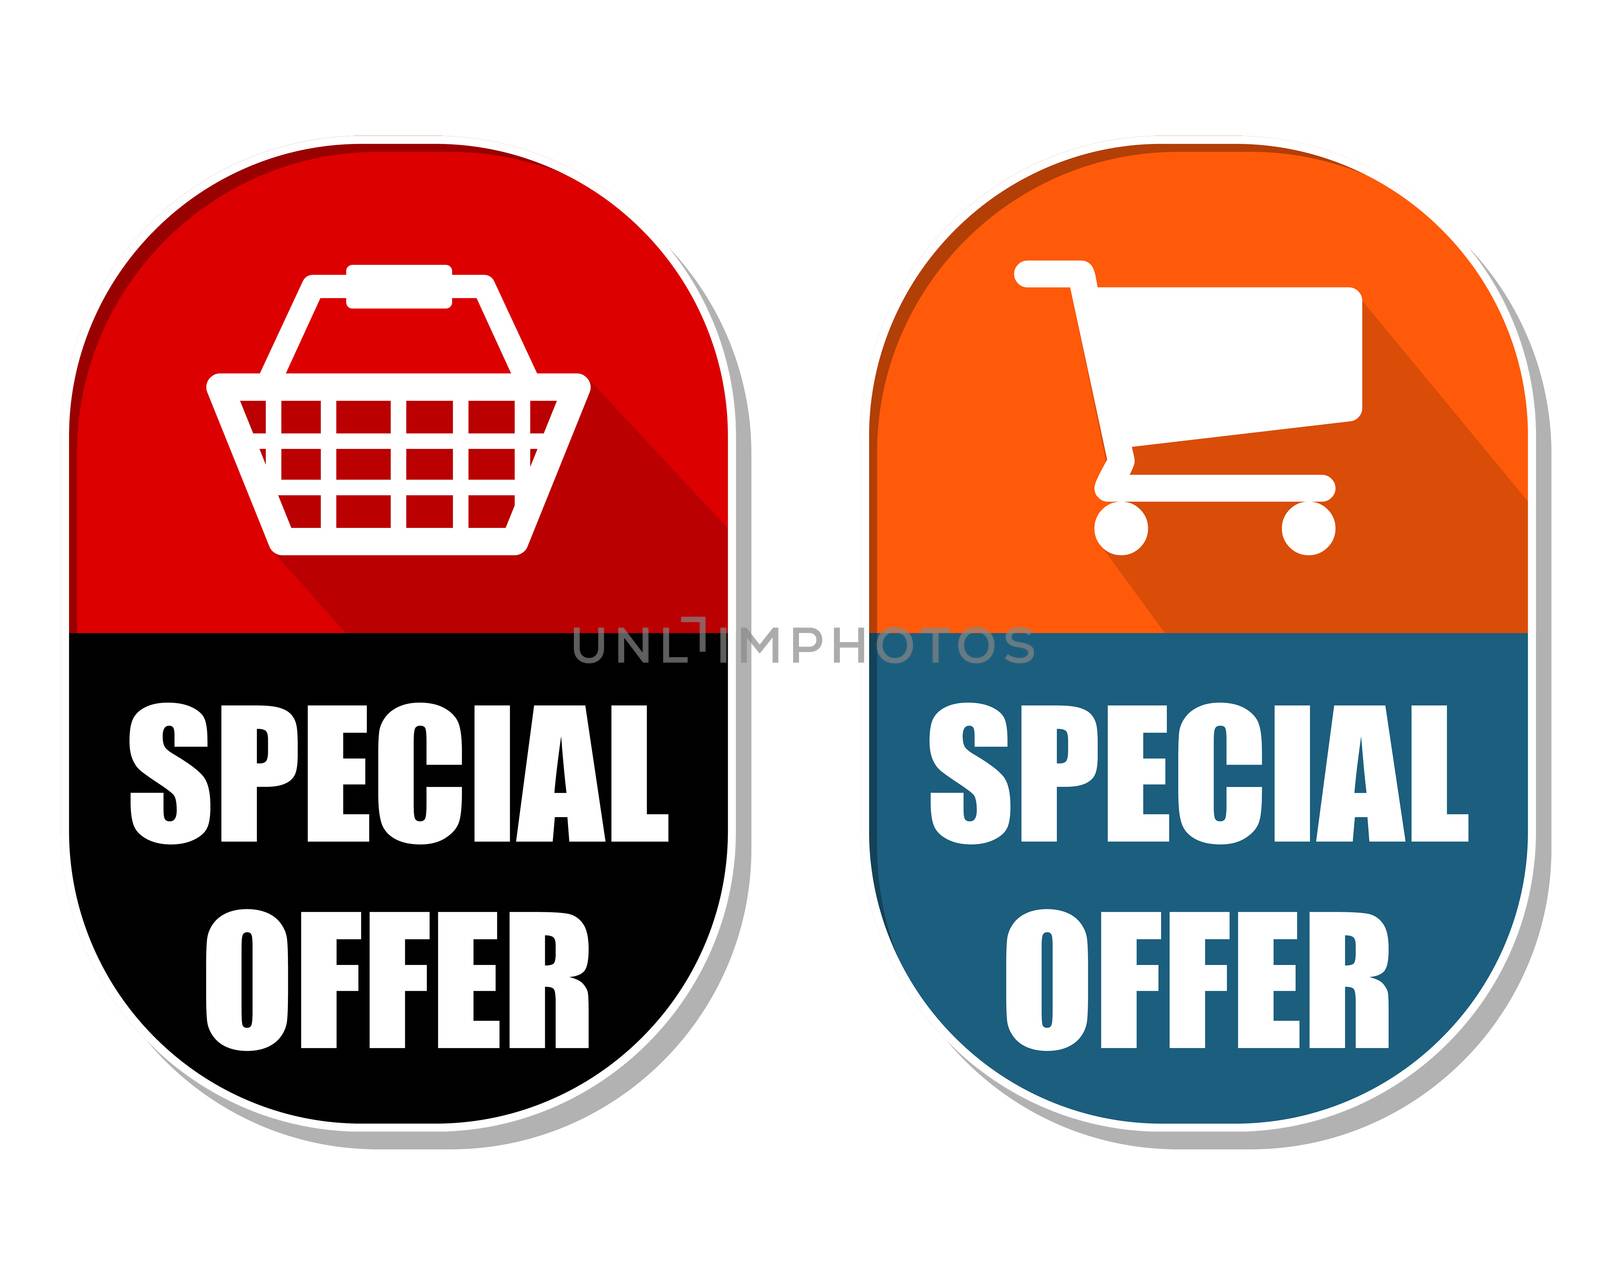 special offer with shopping basket and cart symbols, two elliptic flat design labels with icons, business commerce concept